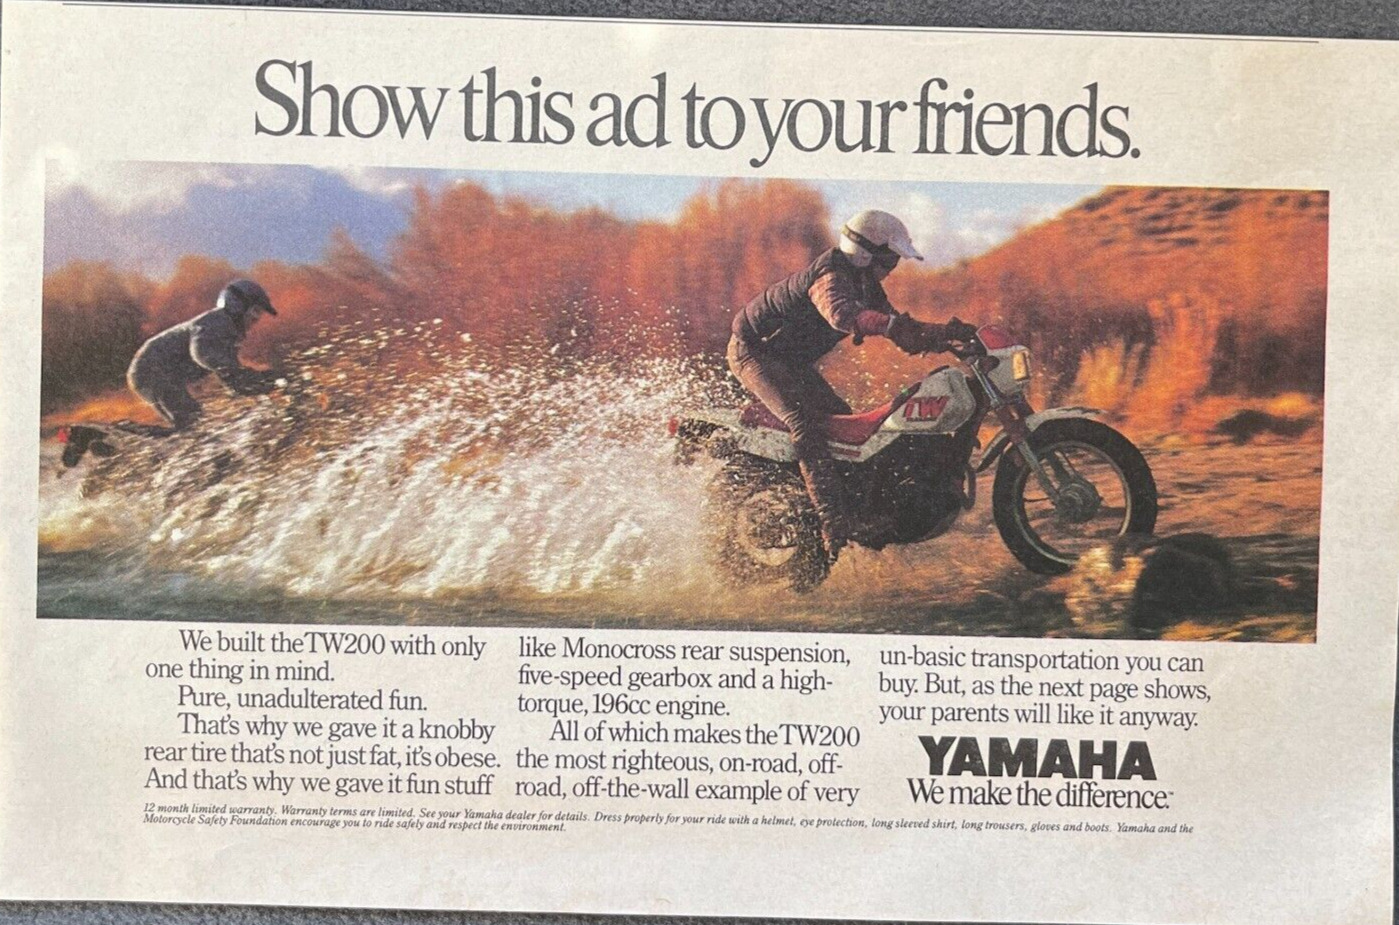 1987 Yamaha Vintage Print Ad Dirt Bikes Ripping Trails Show This To Your Friends